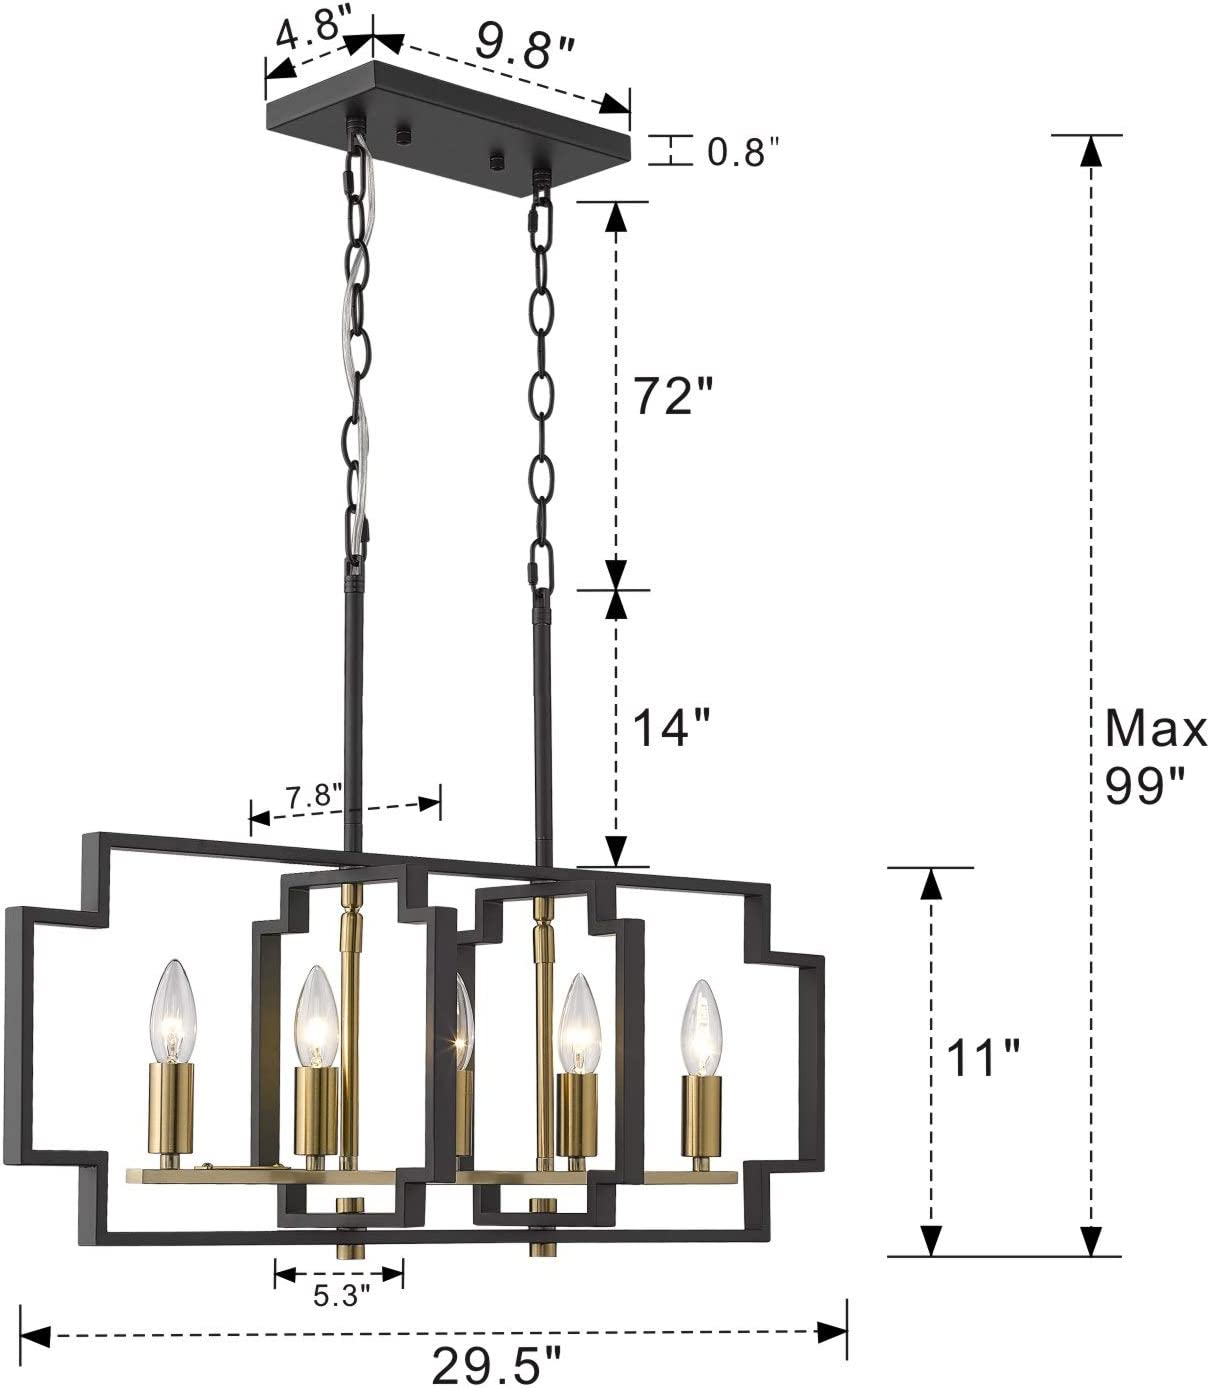 5 light modern chandelier industrial island pendant light with black and gold finish